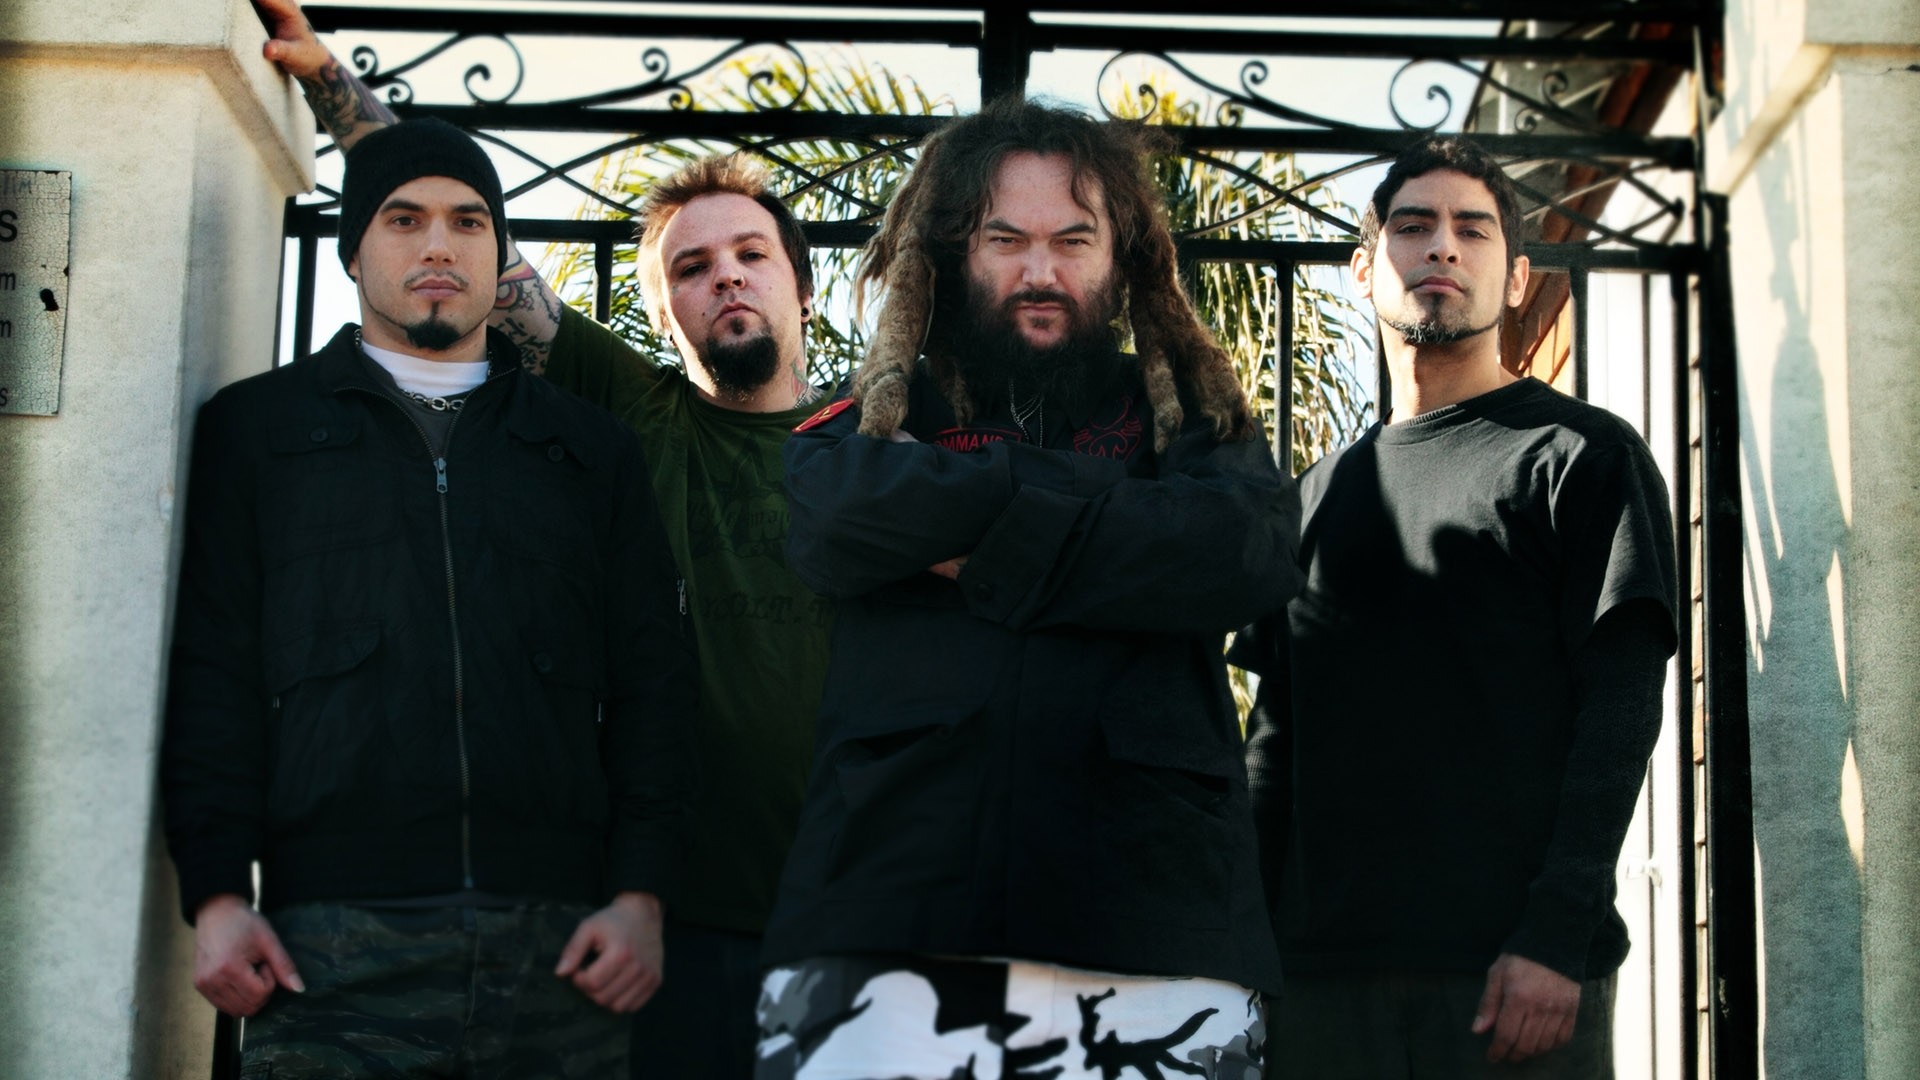 1920x1080 Wallpaper Soulfly, Band, Members, Dreadlocks, Outdoor HD, Picture, Image